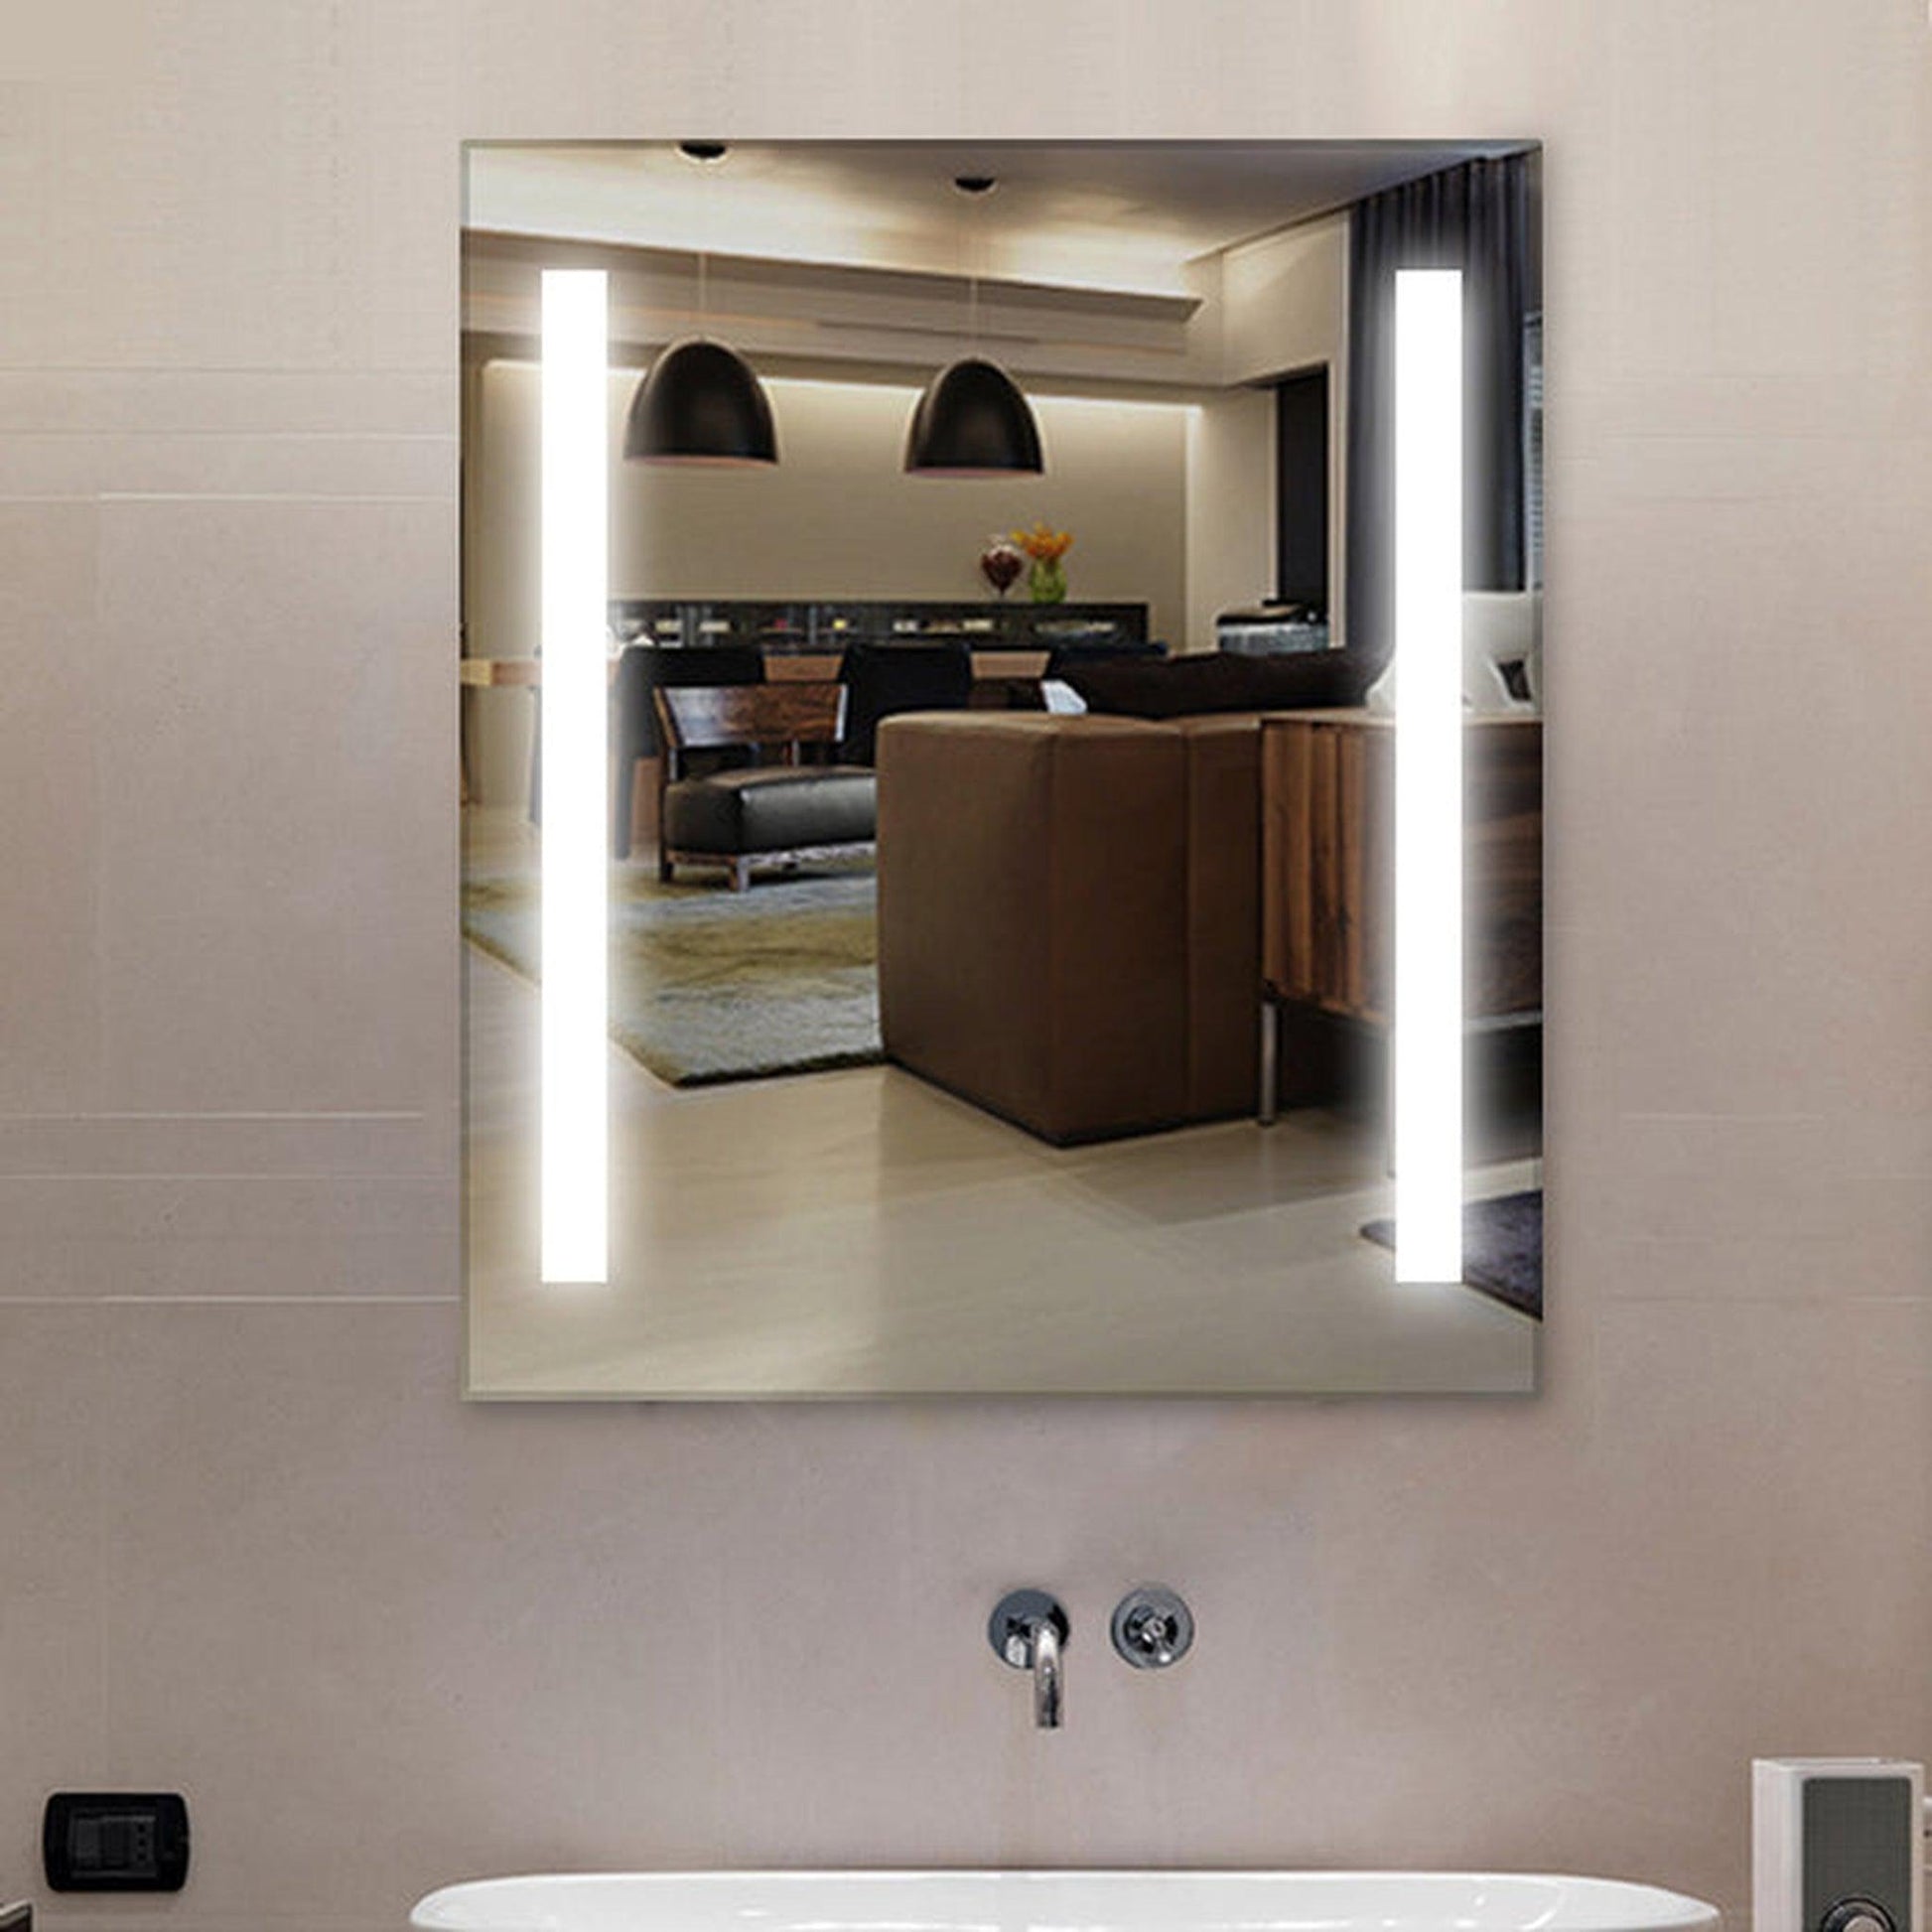 Vanity Art 30" W x 28" H LED Lighted Bathroom Vanity Wall Mirror With Touch Sensor Switch